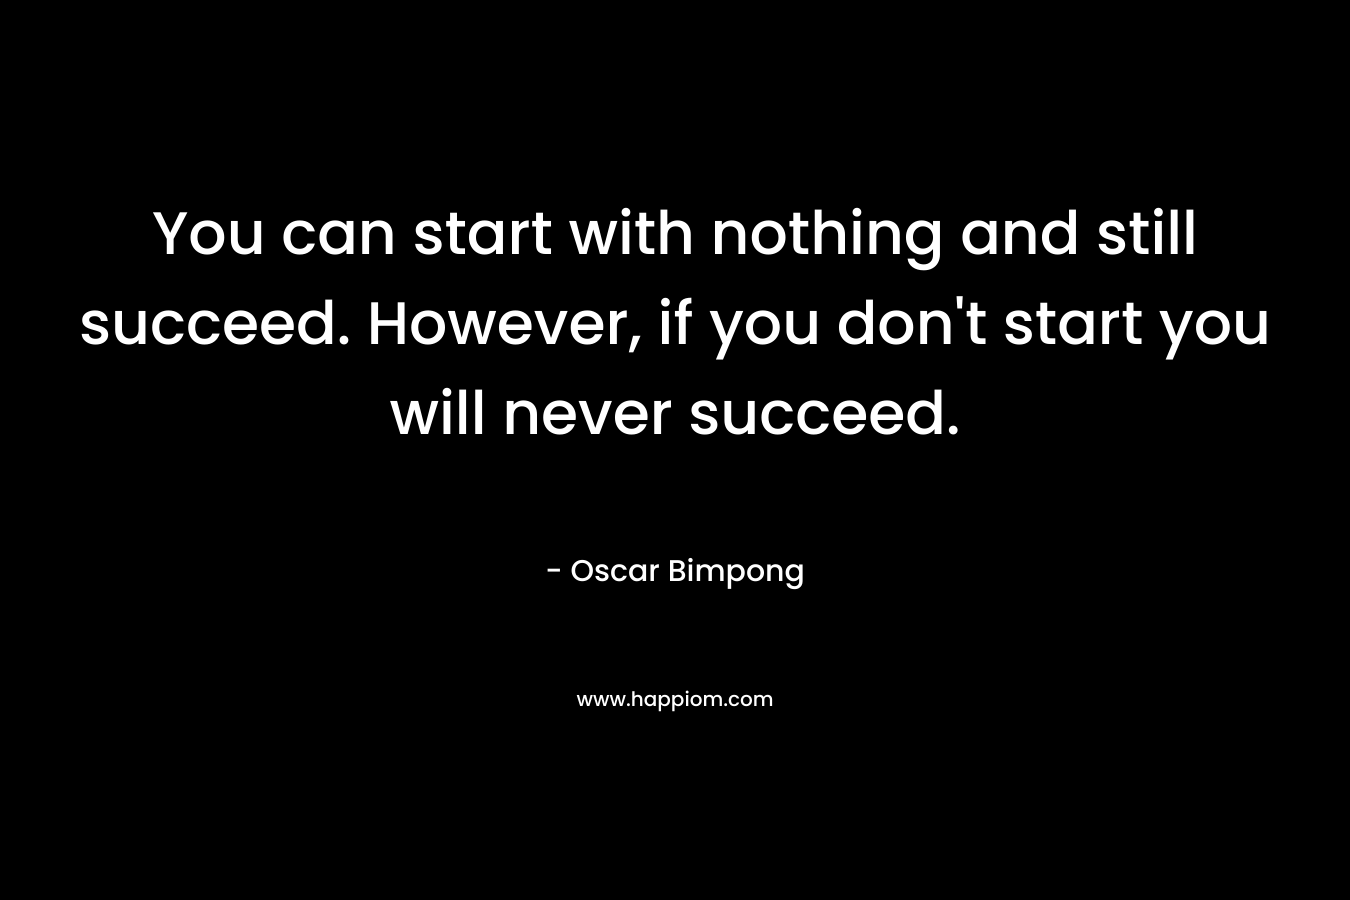 You can start with nothing and still succeed. However, if you don’t start you will never succeed. – Oscar Bimpong